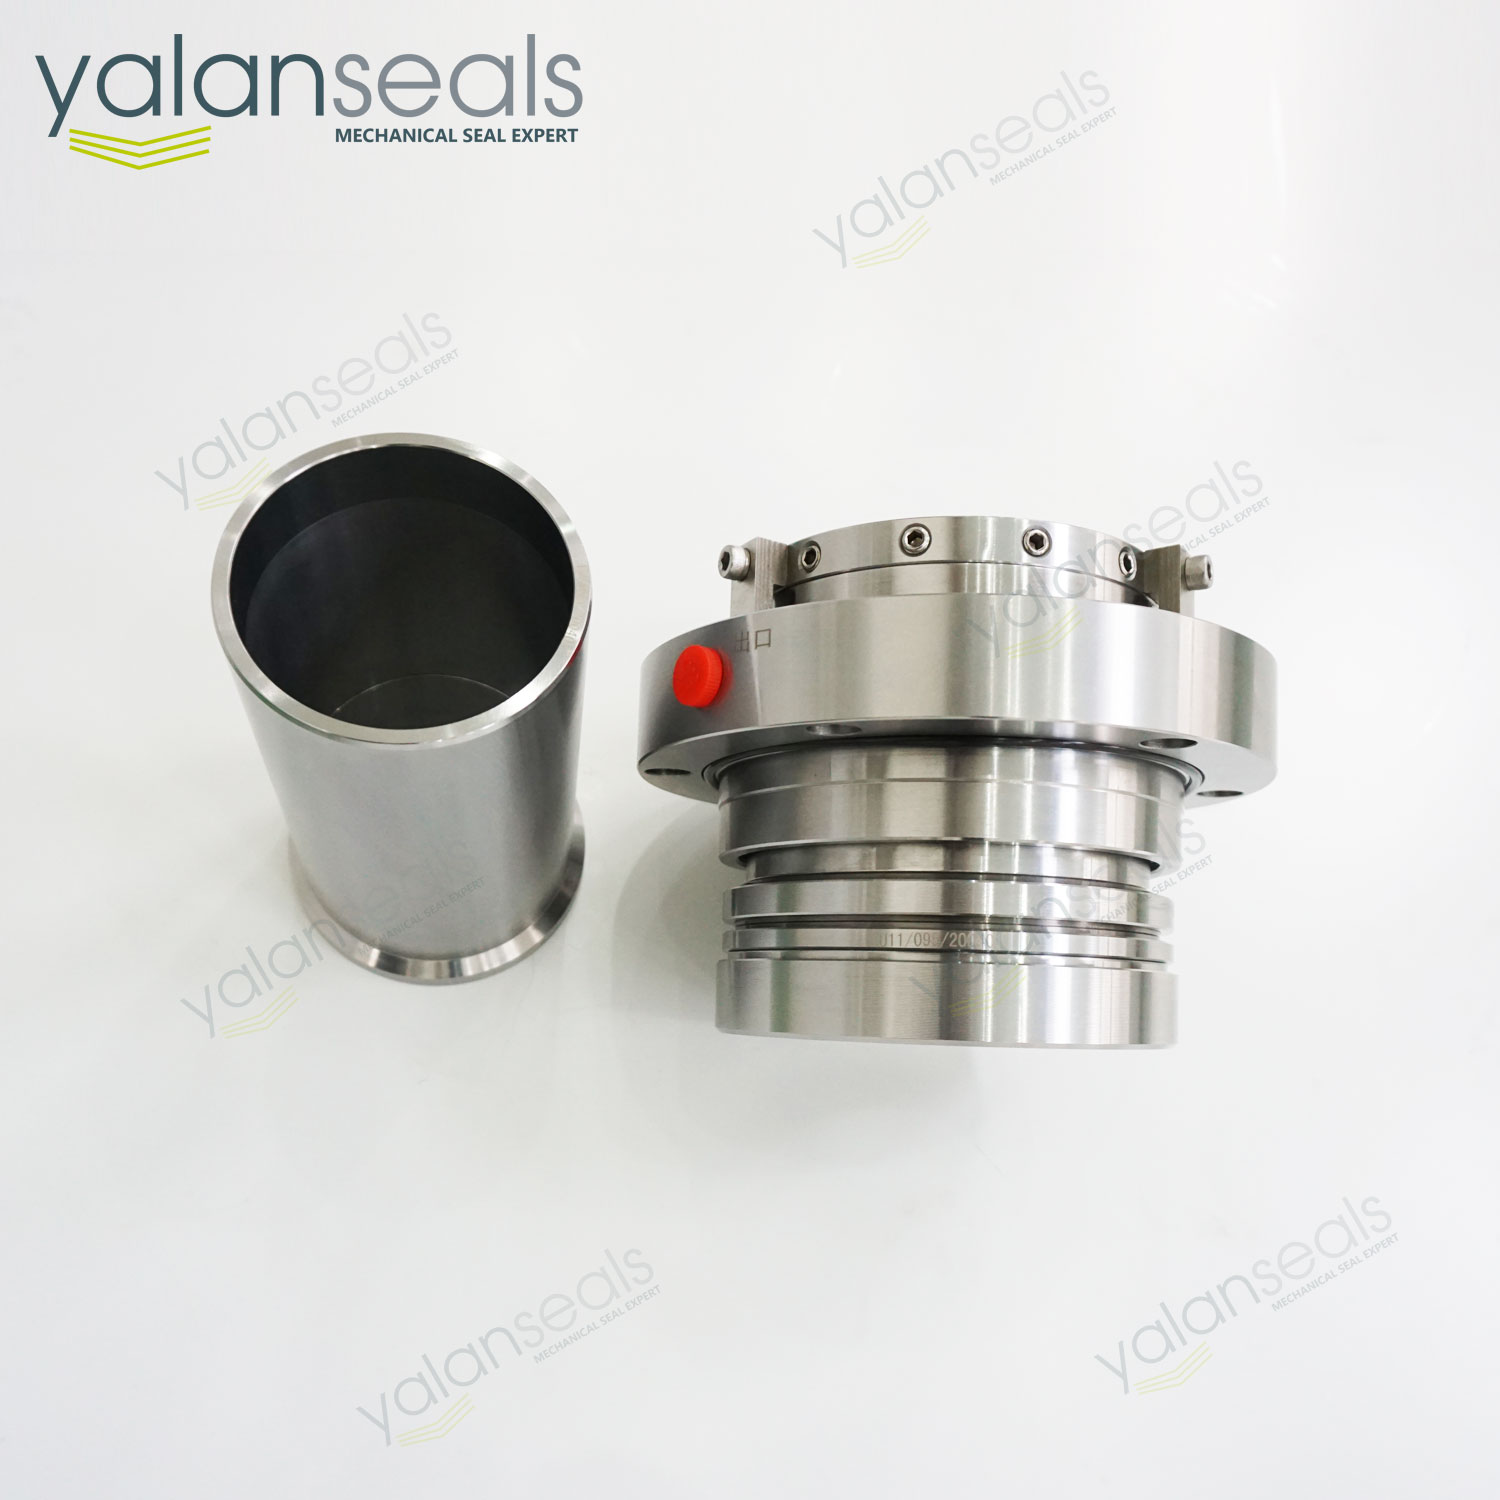 YALAN ZGJ-D-95WN Double Cartridge Mechanical Seals for Slurry and Chemical Pumps